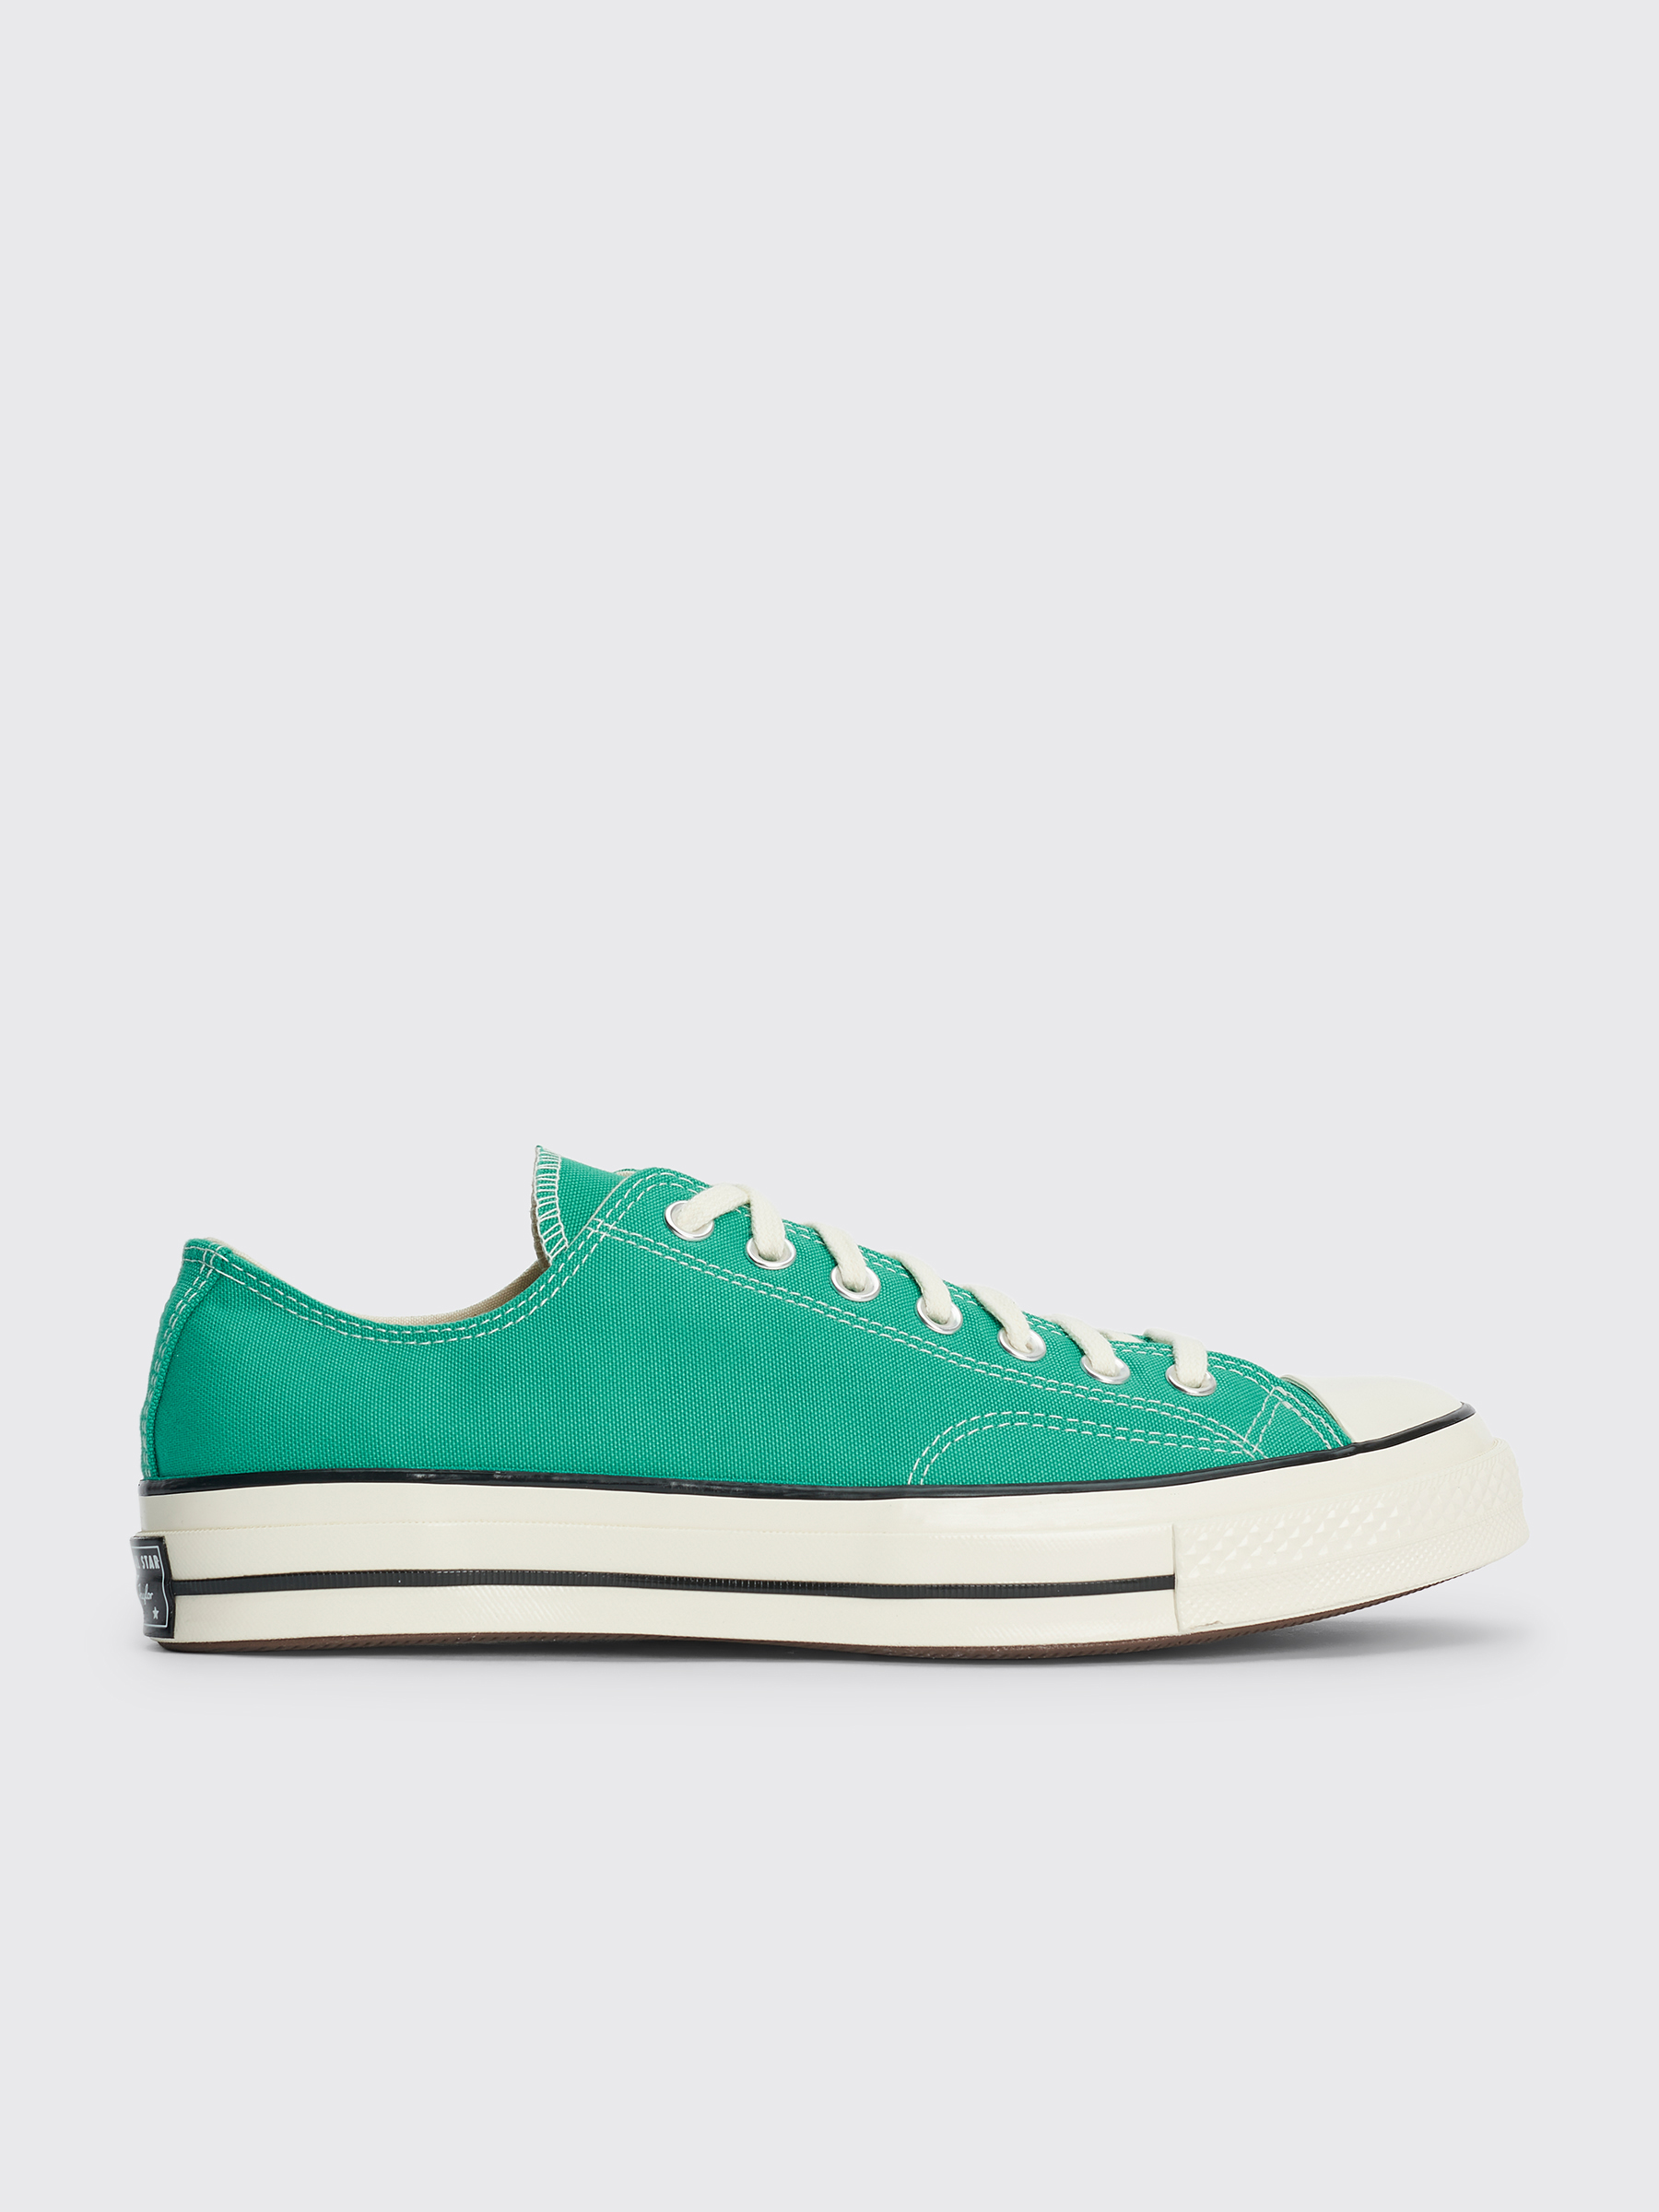 converse with green insole